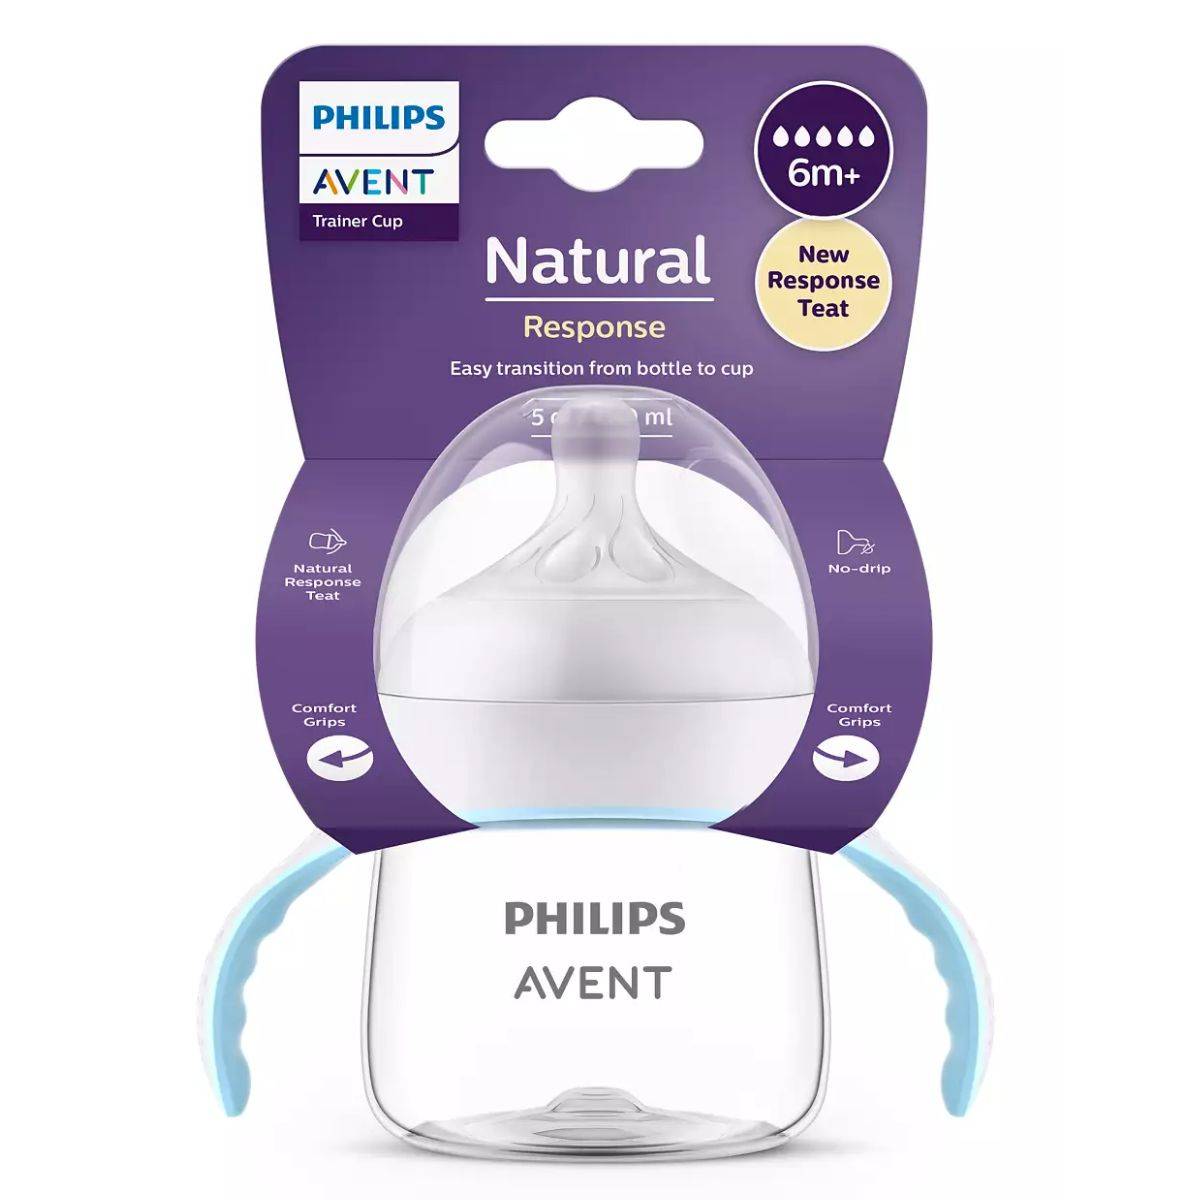 Philips Avent Sucette 6m+ Soft Girl